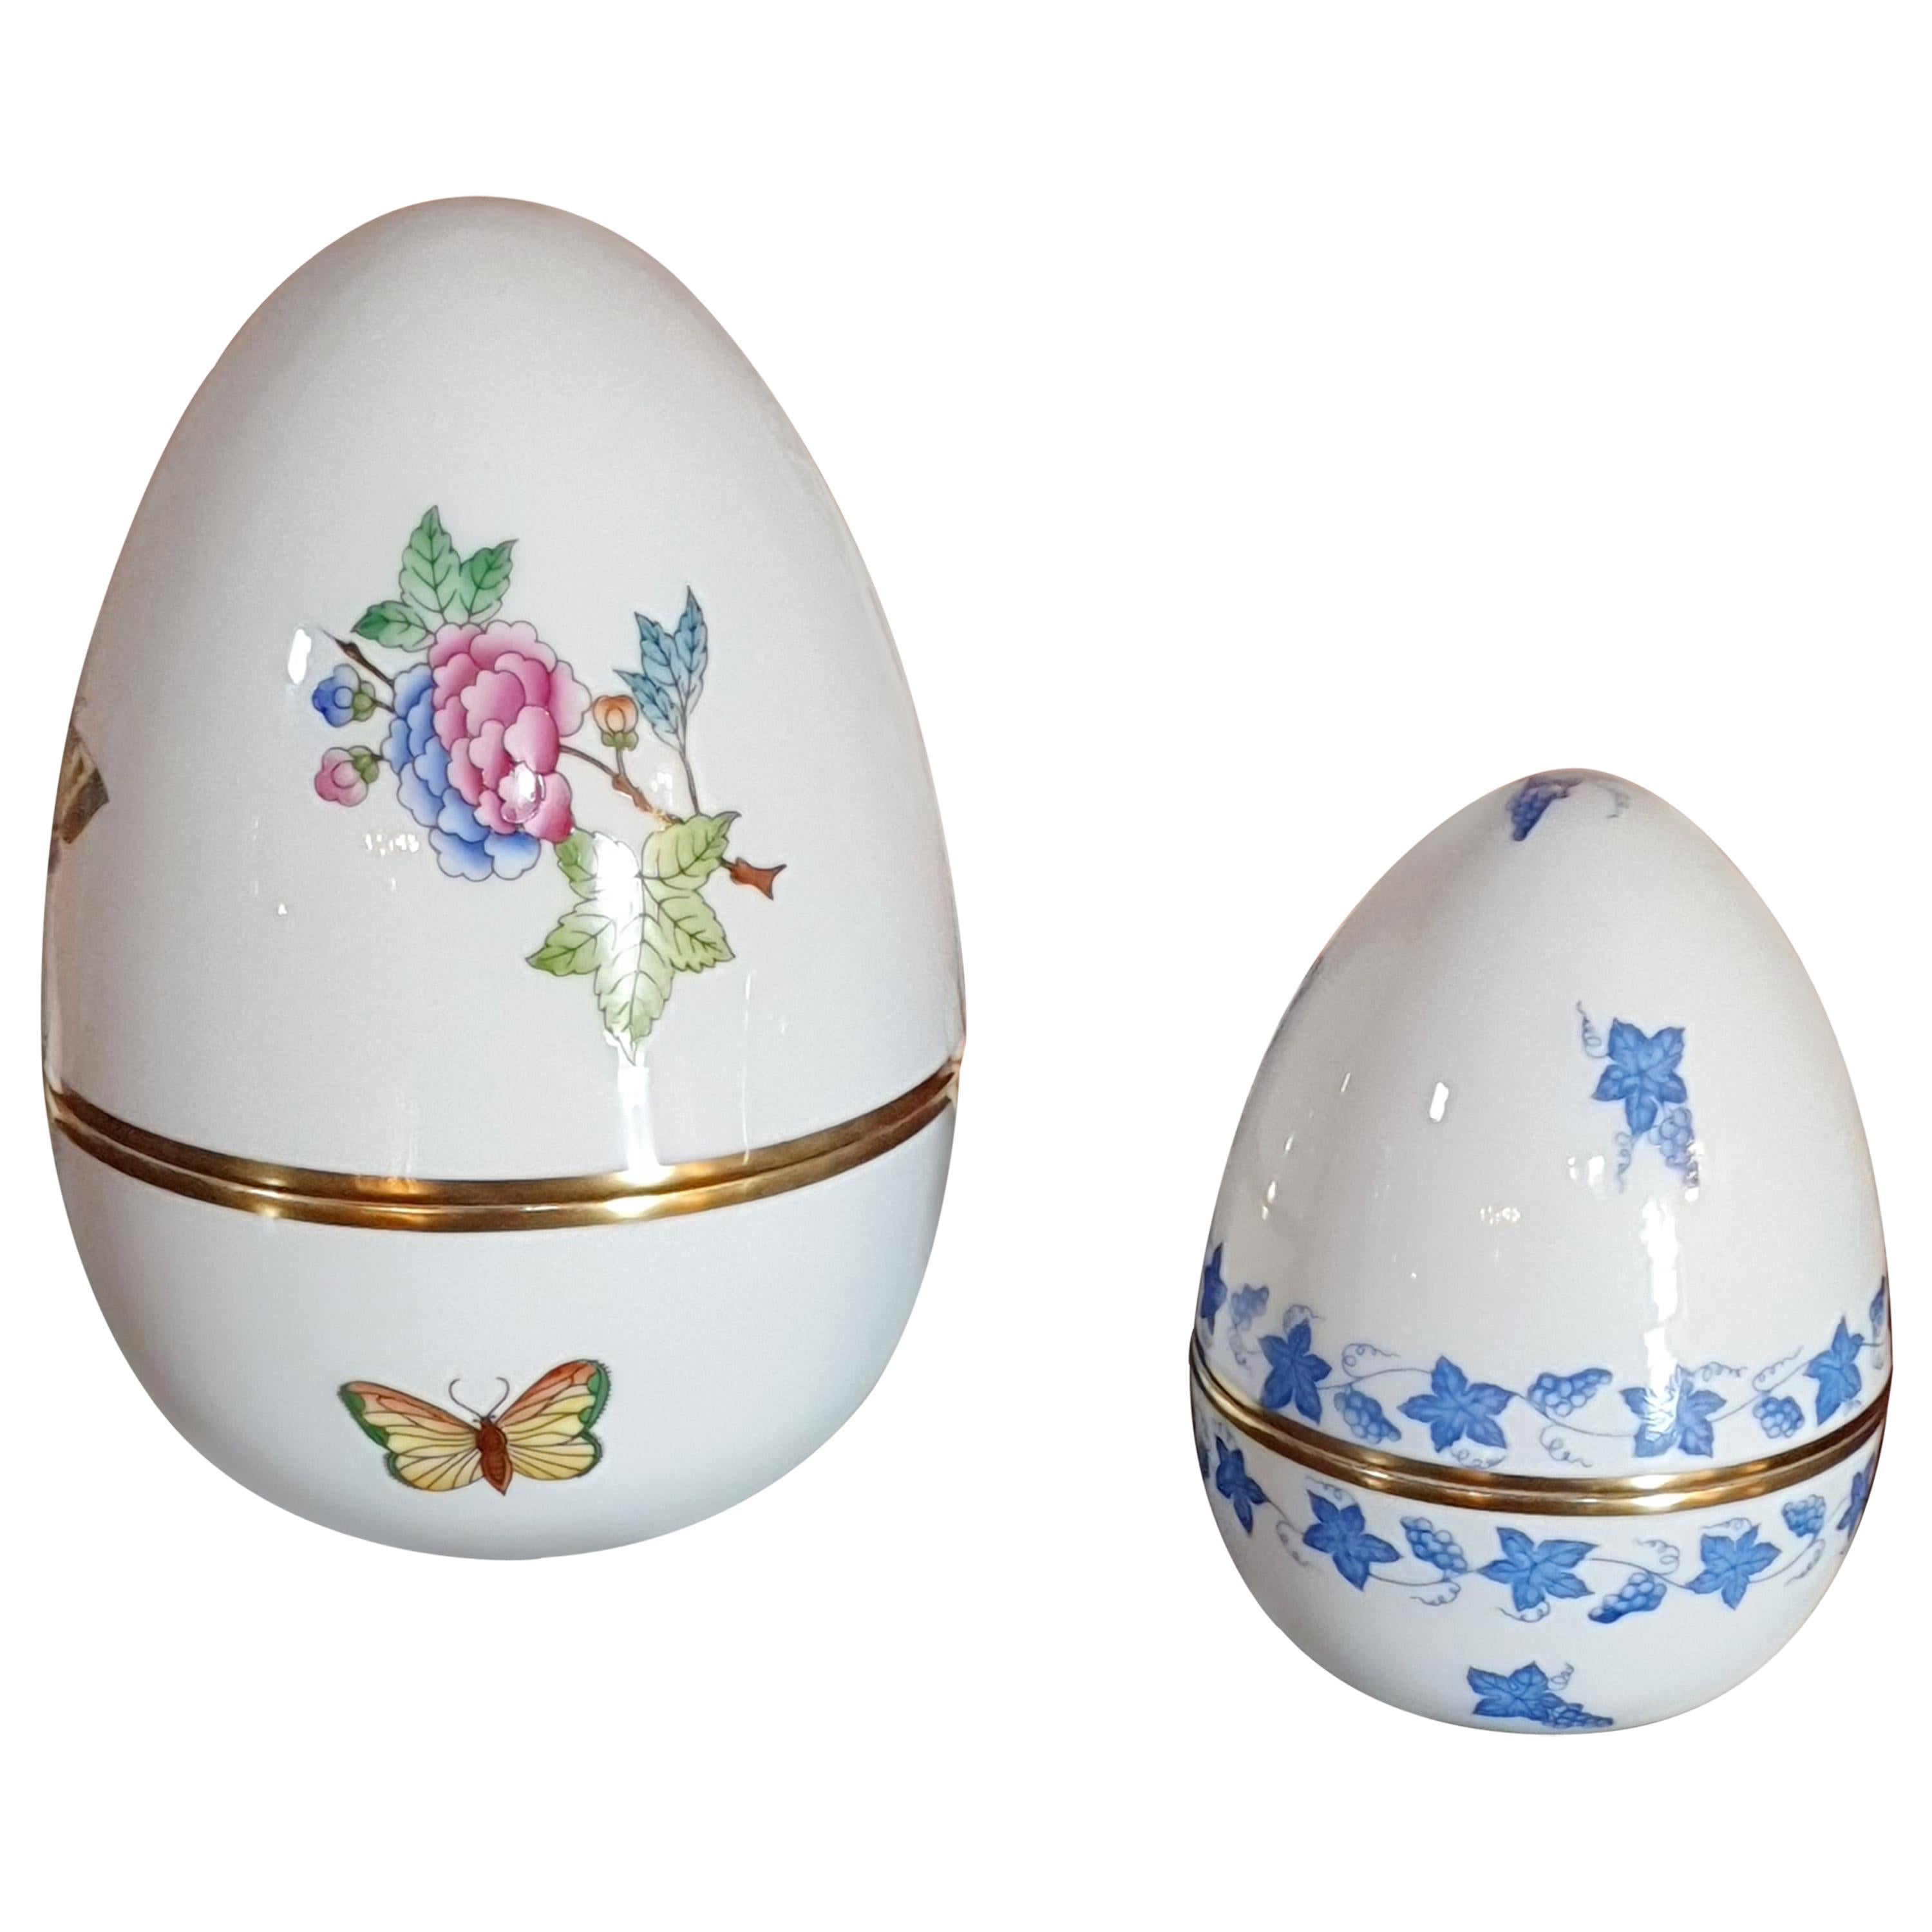 Herend Hand Painted Porcelain Set of Two Egg Boxes, Hungary, 2021, New